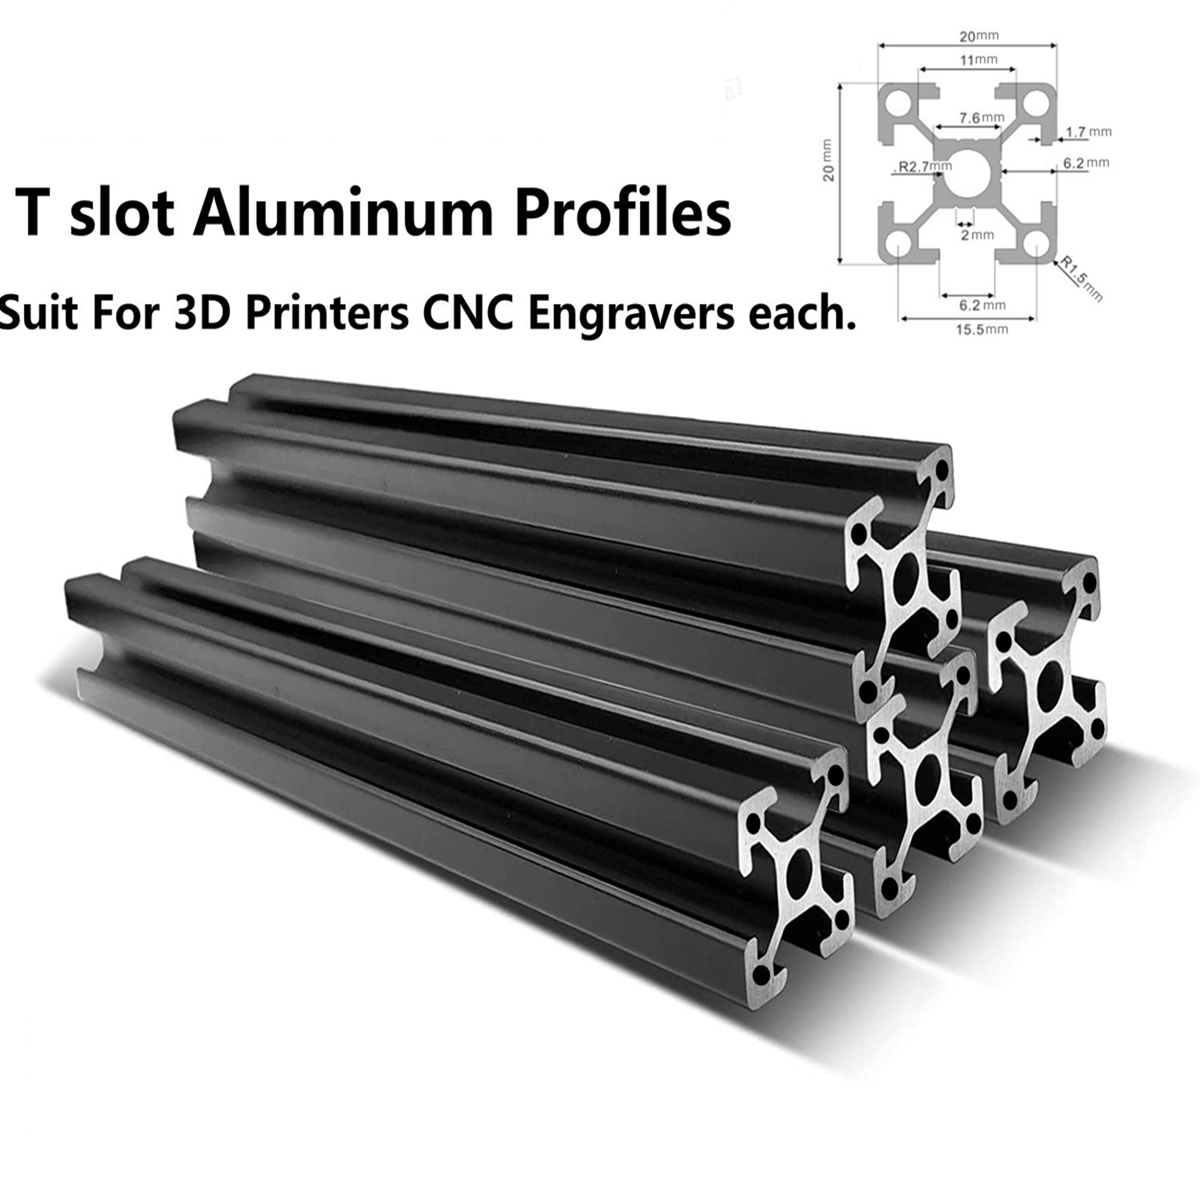 100-1200mm-Length-2020-T-Slot-Aluminum-Profiles-Extrusion-Frame--For-CNC-Stands-1940898-1